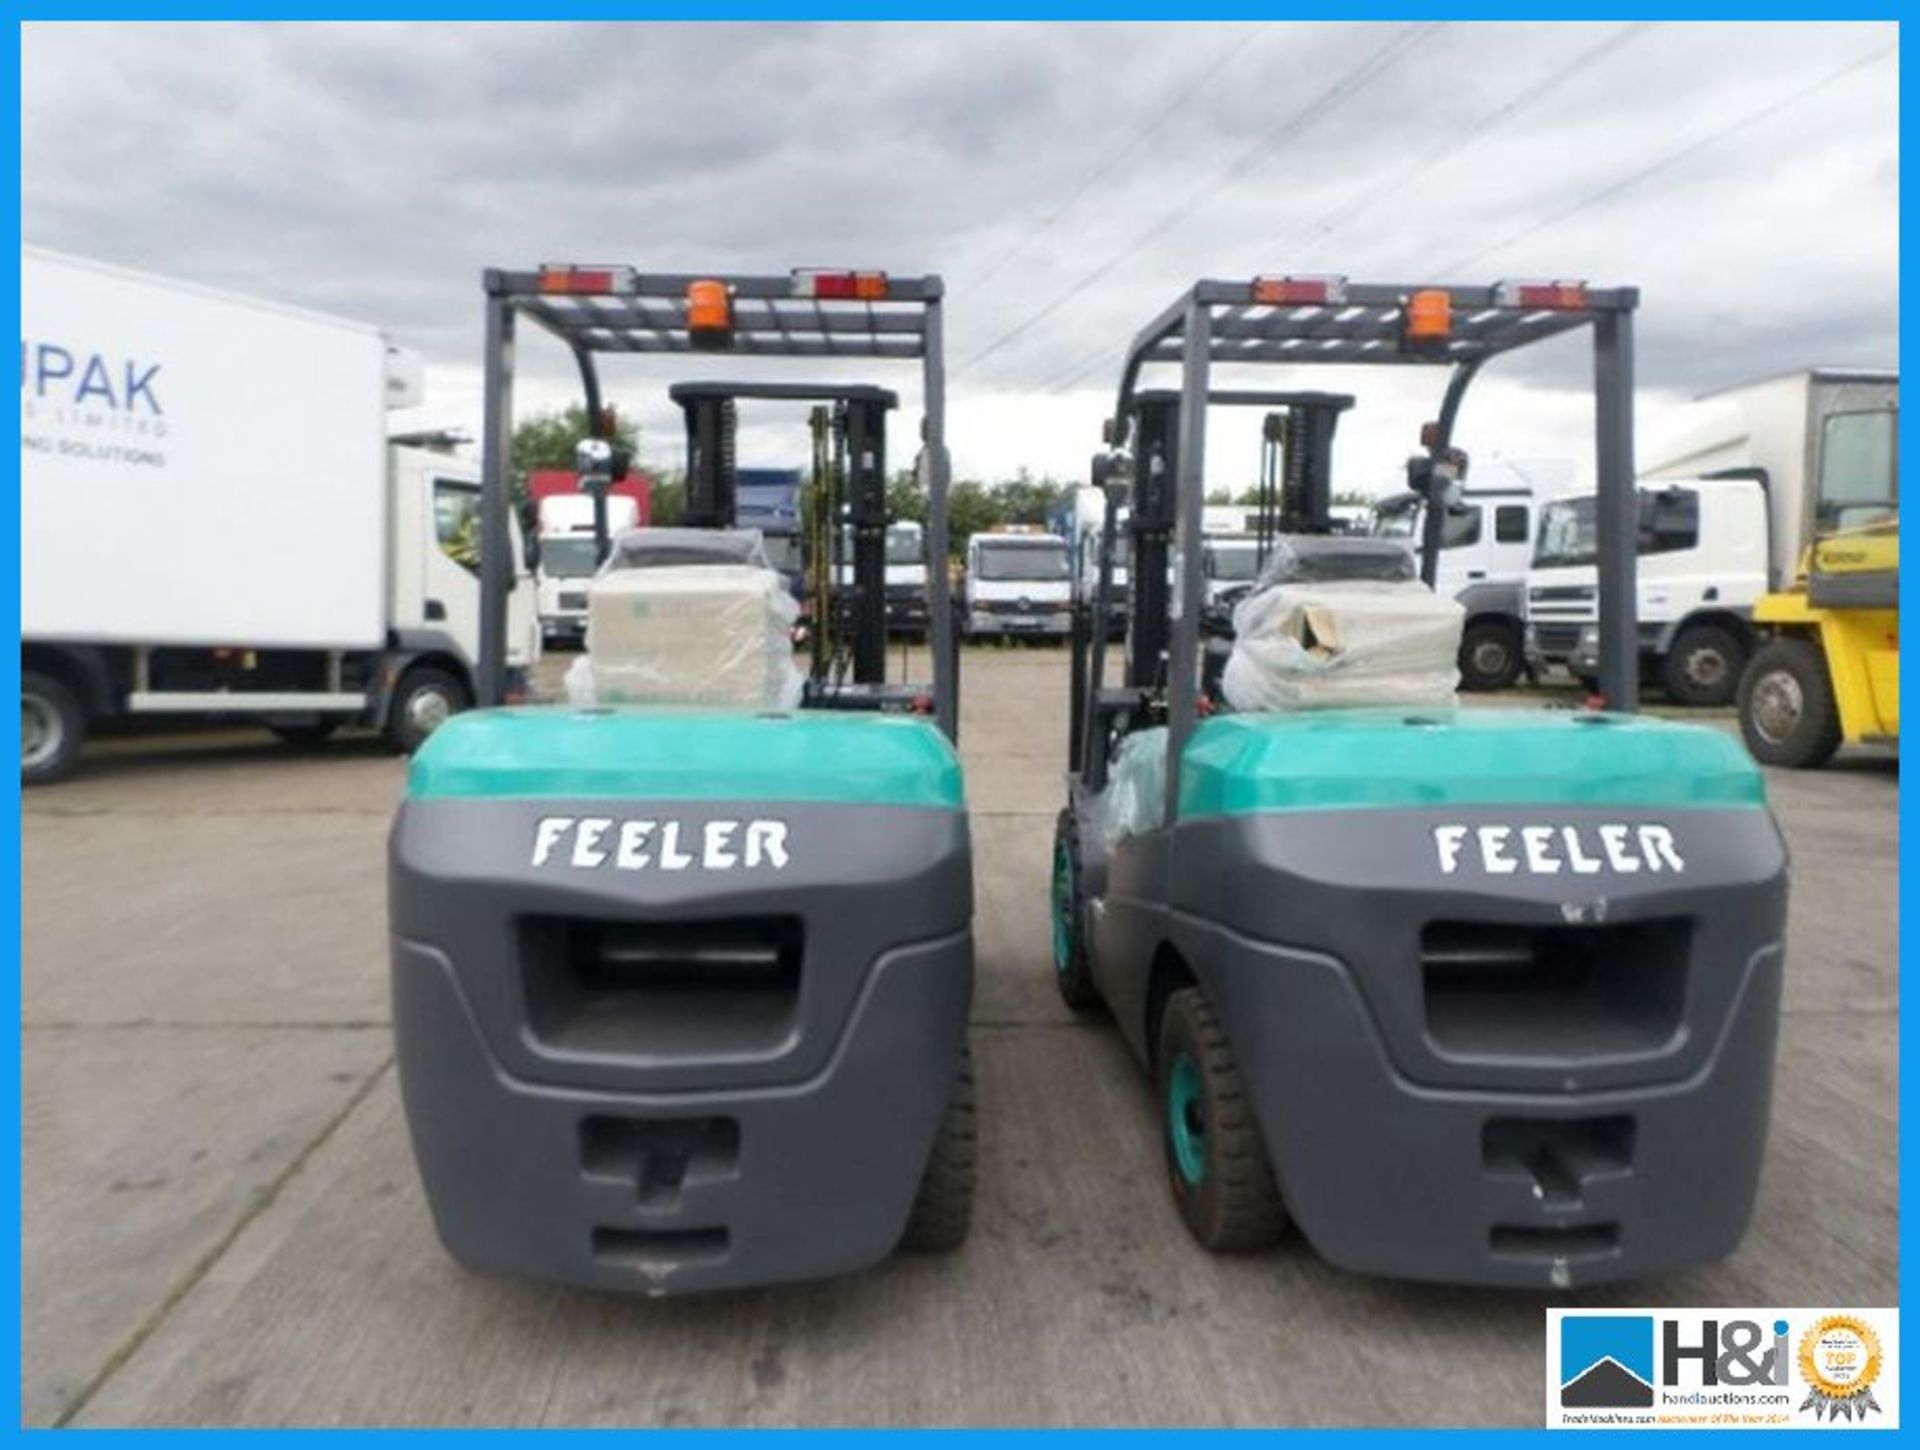 2016 new feeler fd30 3 ton forklift, container spec, side shift, diesel, brand new Appraisal: - Image 8 of 8